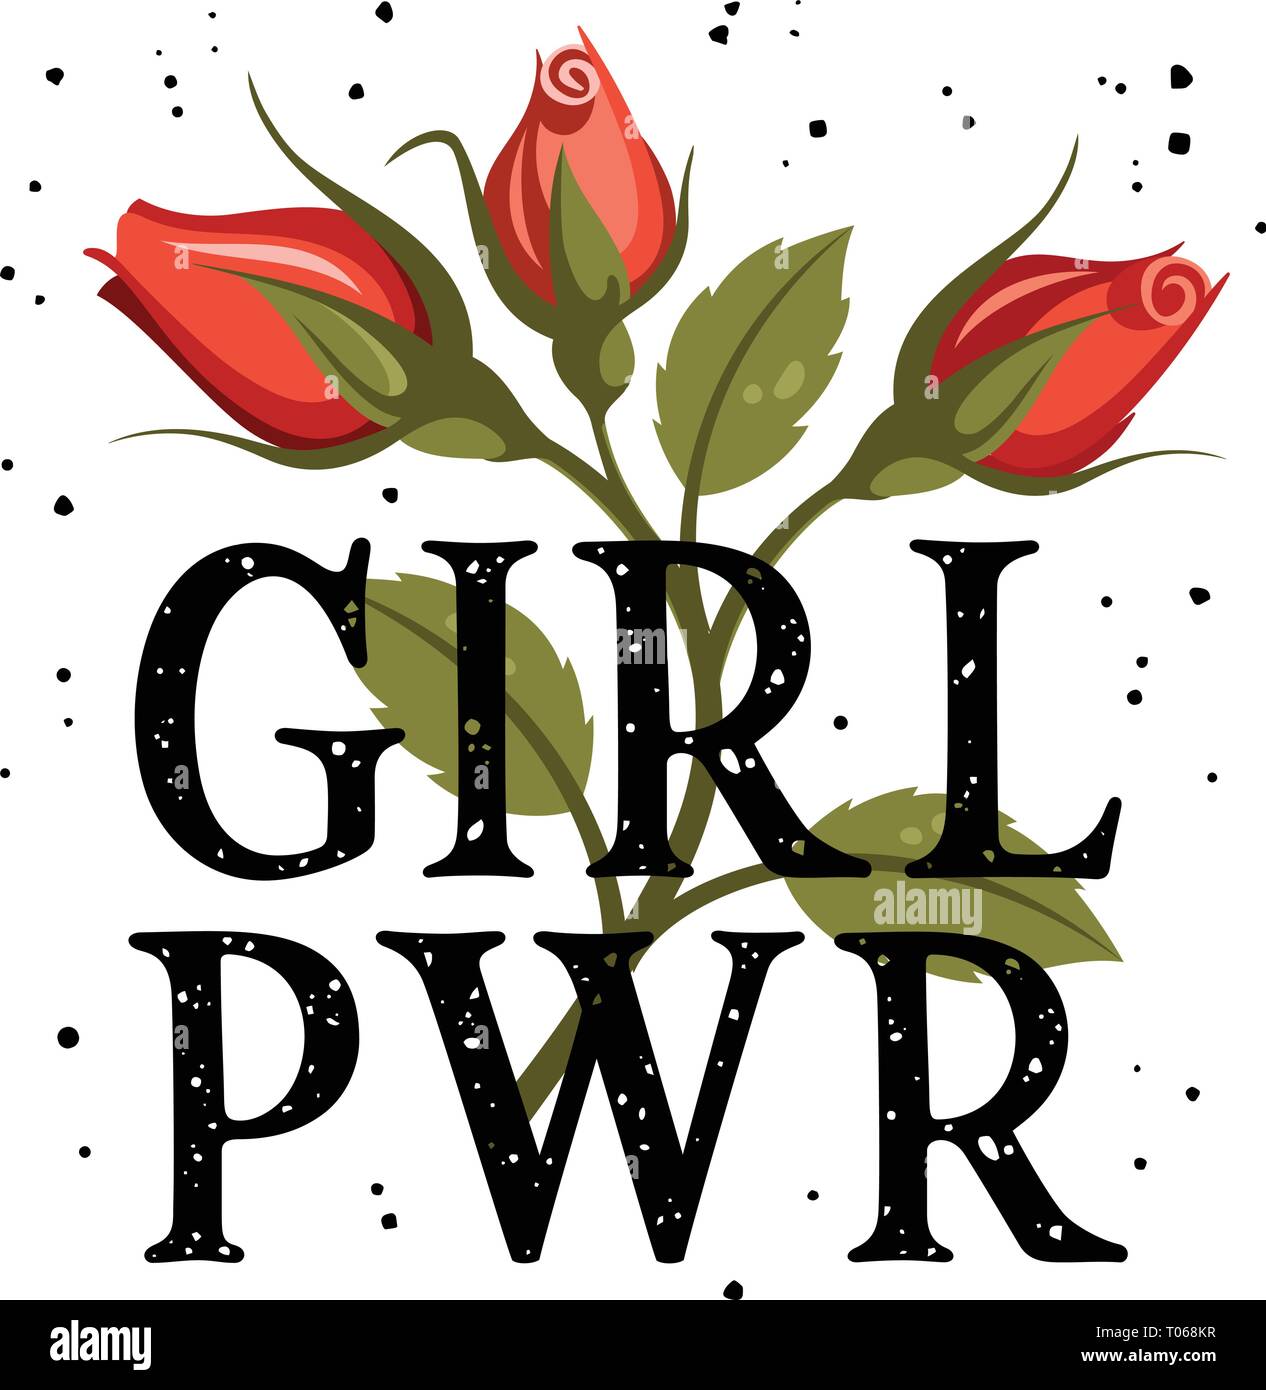 Girl power t-shirt design, slogan typography with red roses, embroidery patch. Female  Graphic Tee. Vectors Stock Vector